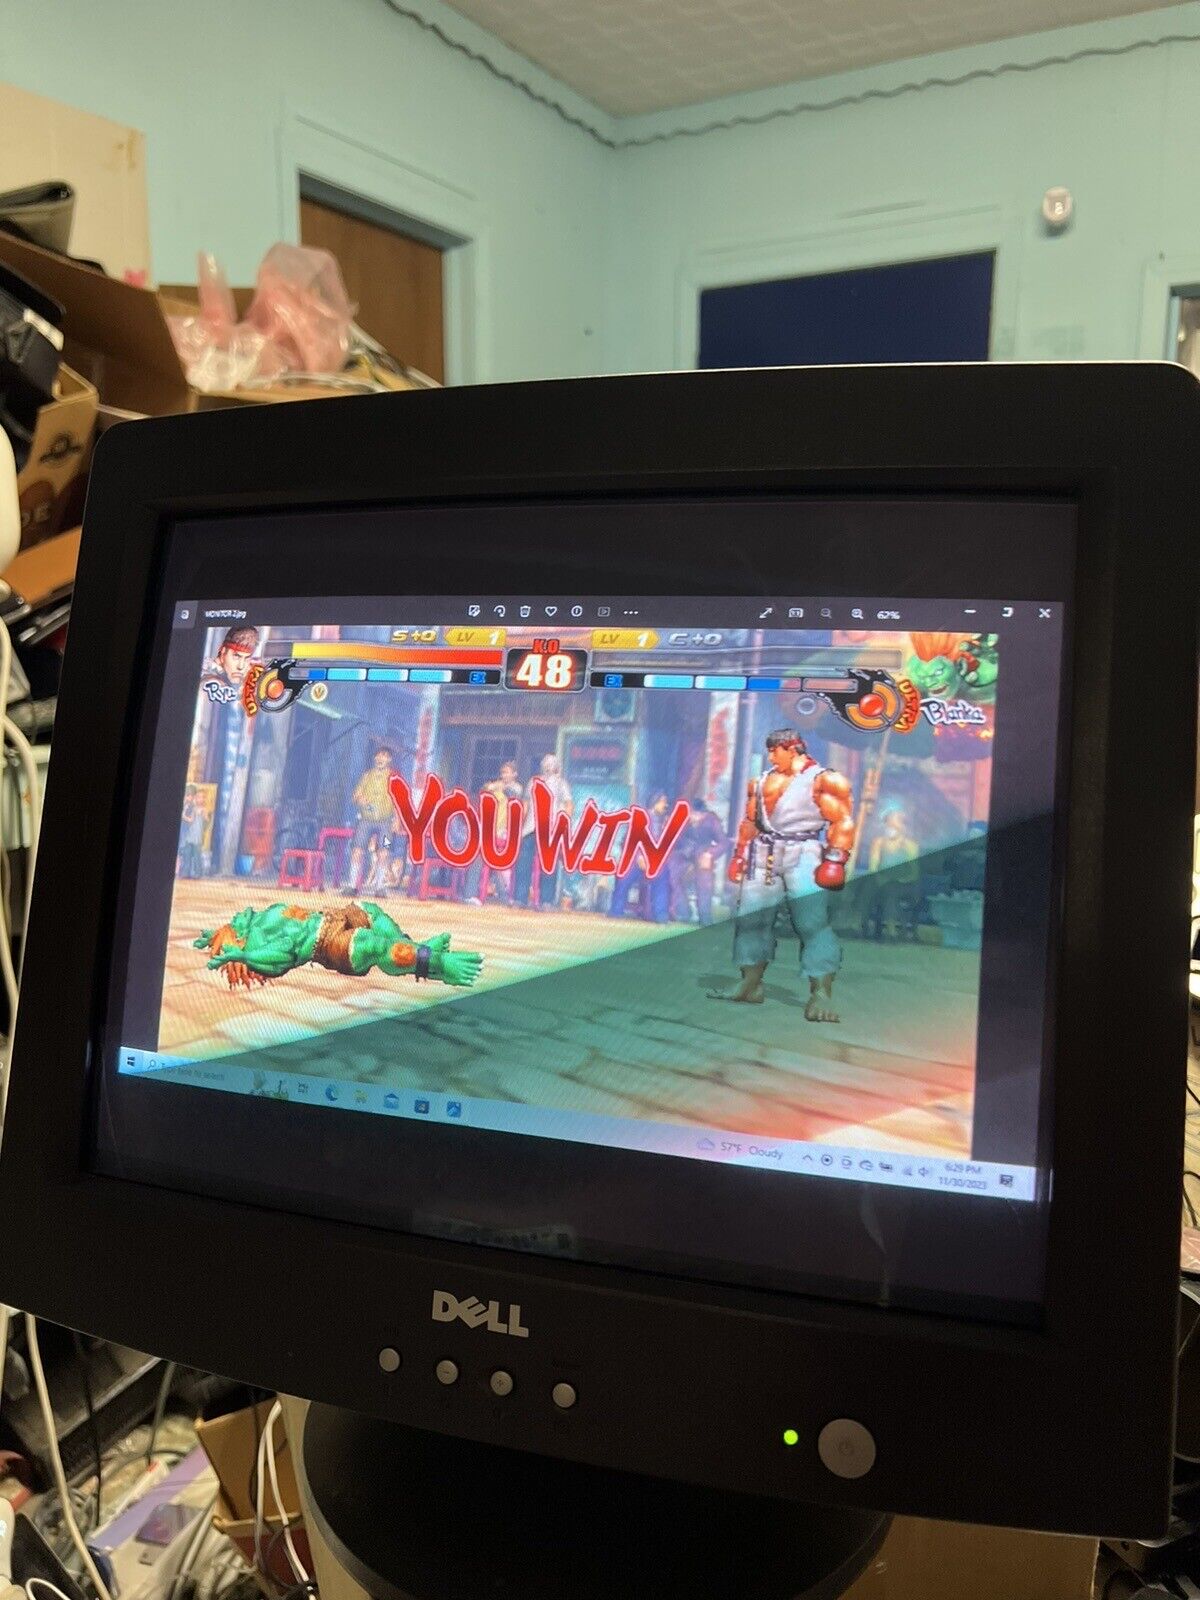 Vintage DELL E773s CRT Monitor for Retro Gaming 17” Flat Panel Windows XP 98